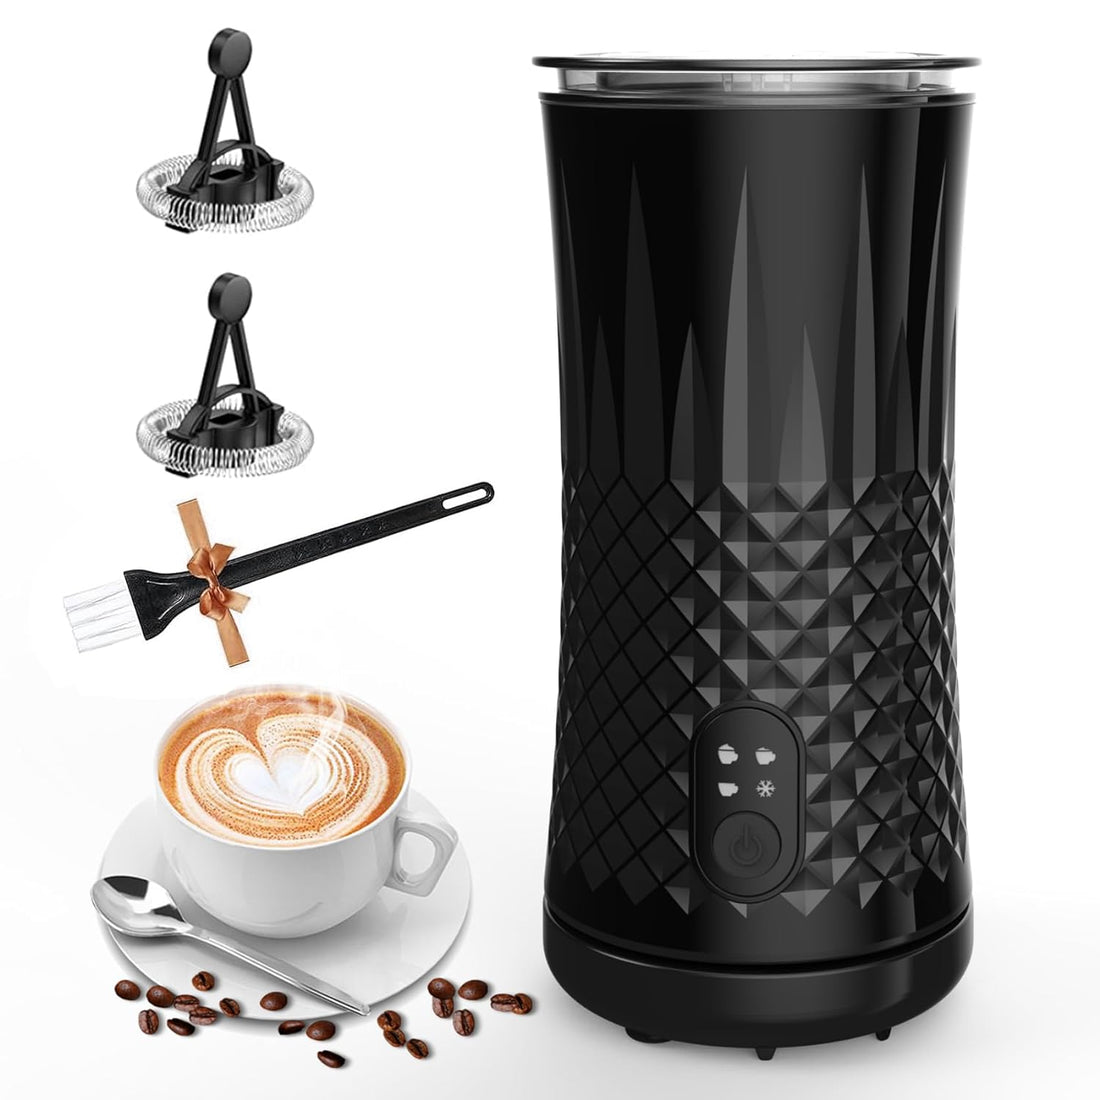 Milk Frother, Ausyle 4-in-1 Electric Milk Frother and Steamer, Non-Slip Stylish Design, Hot & Cold Milk Steamer with Temperature Control, Auto Shut-Off Frother for Coffee, Latte, Cappuccino, Macchiato